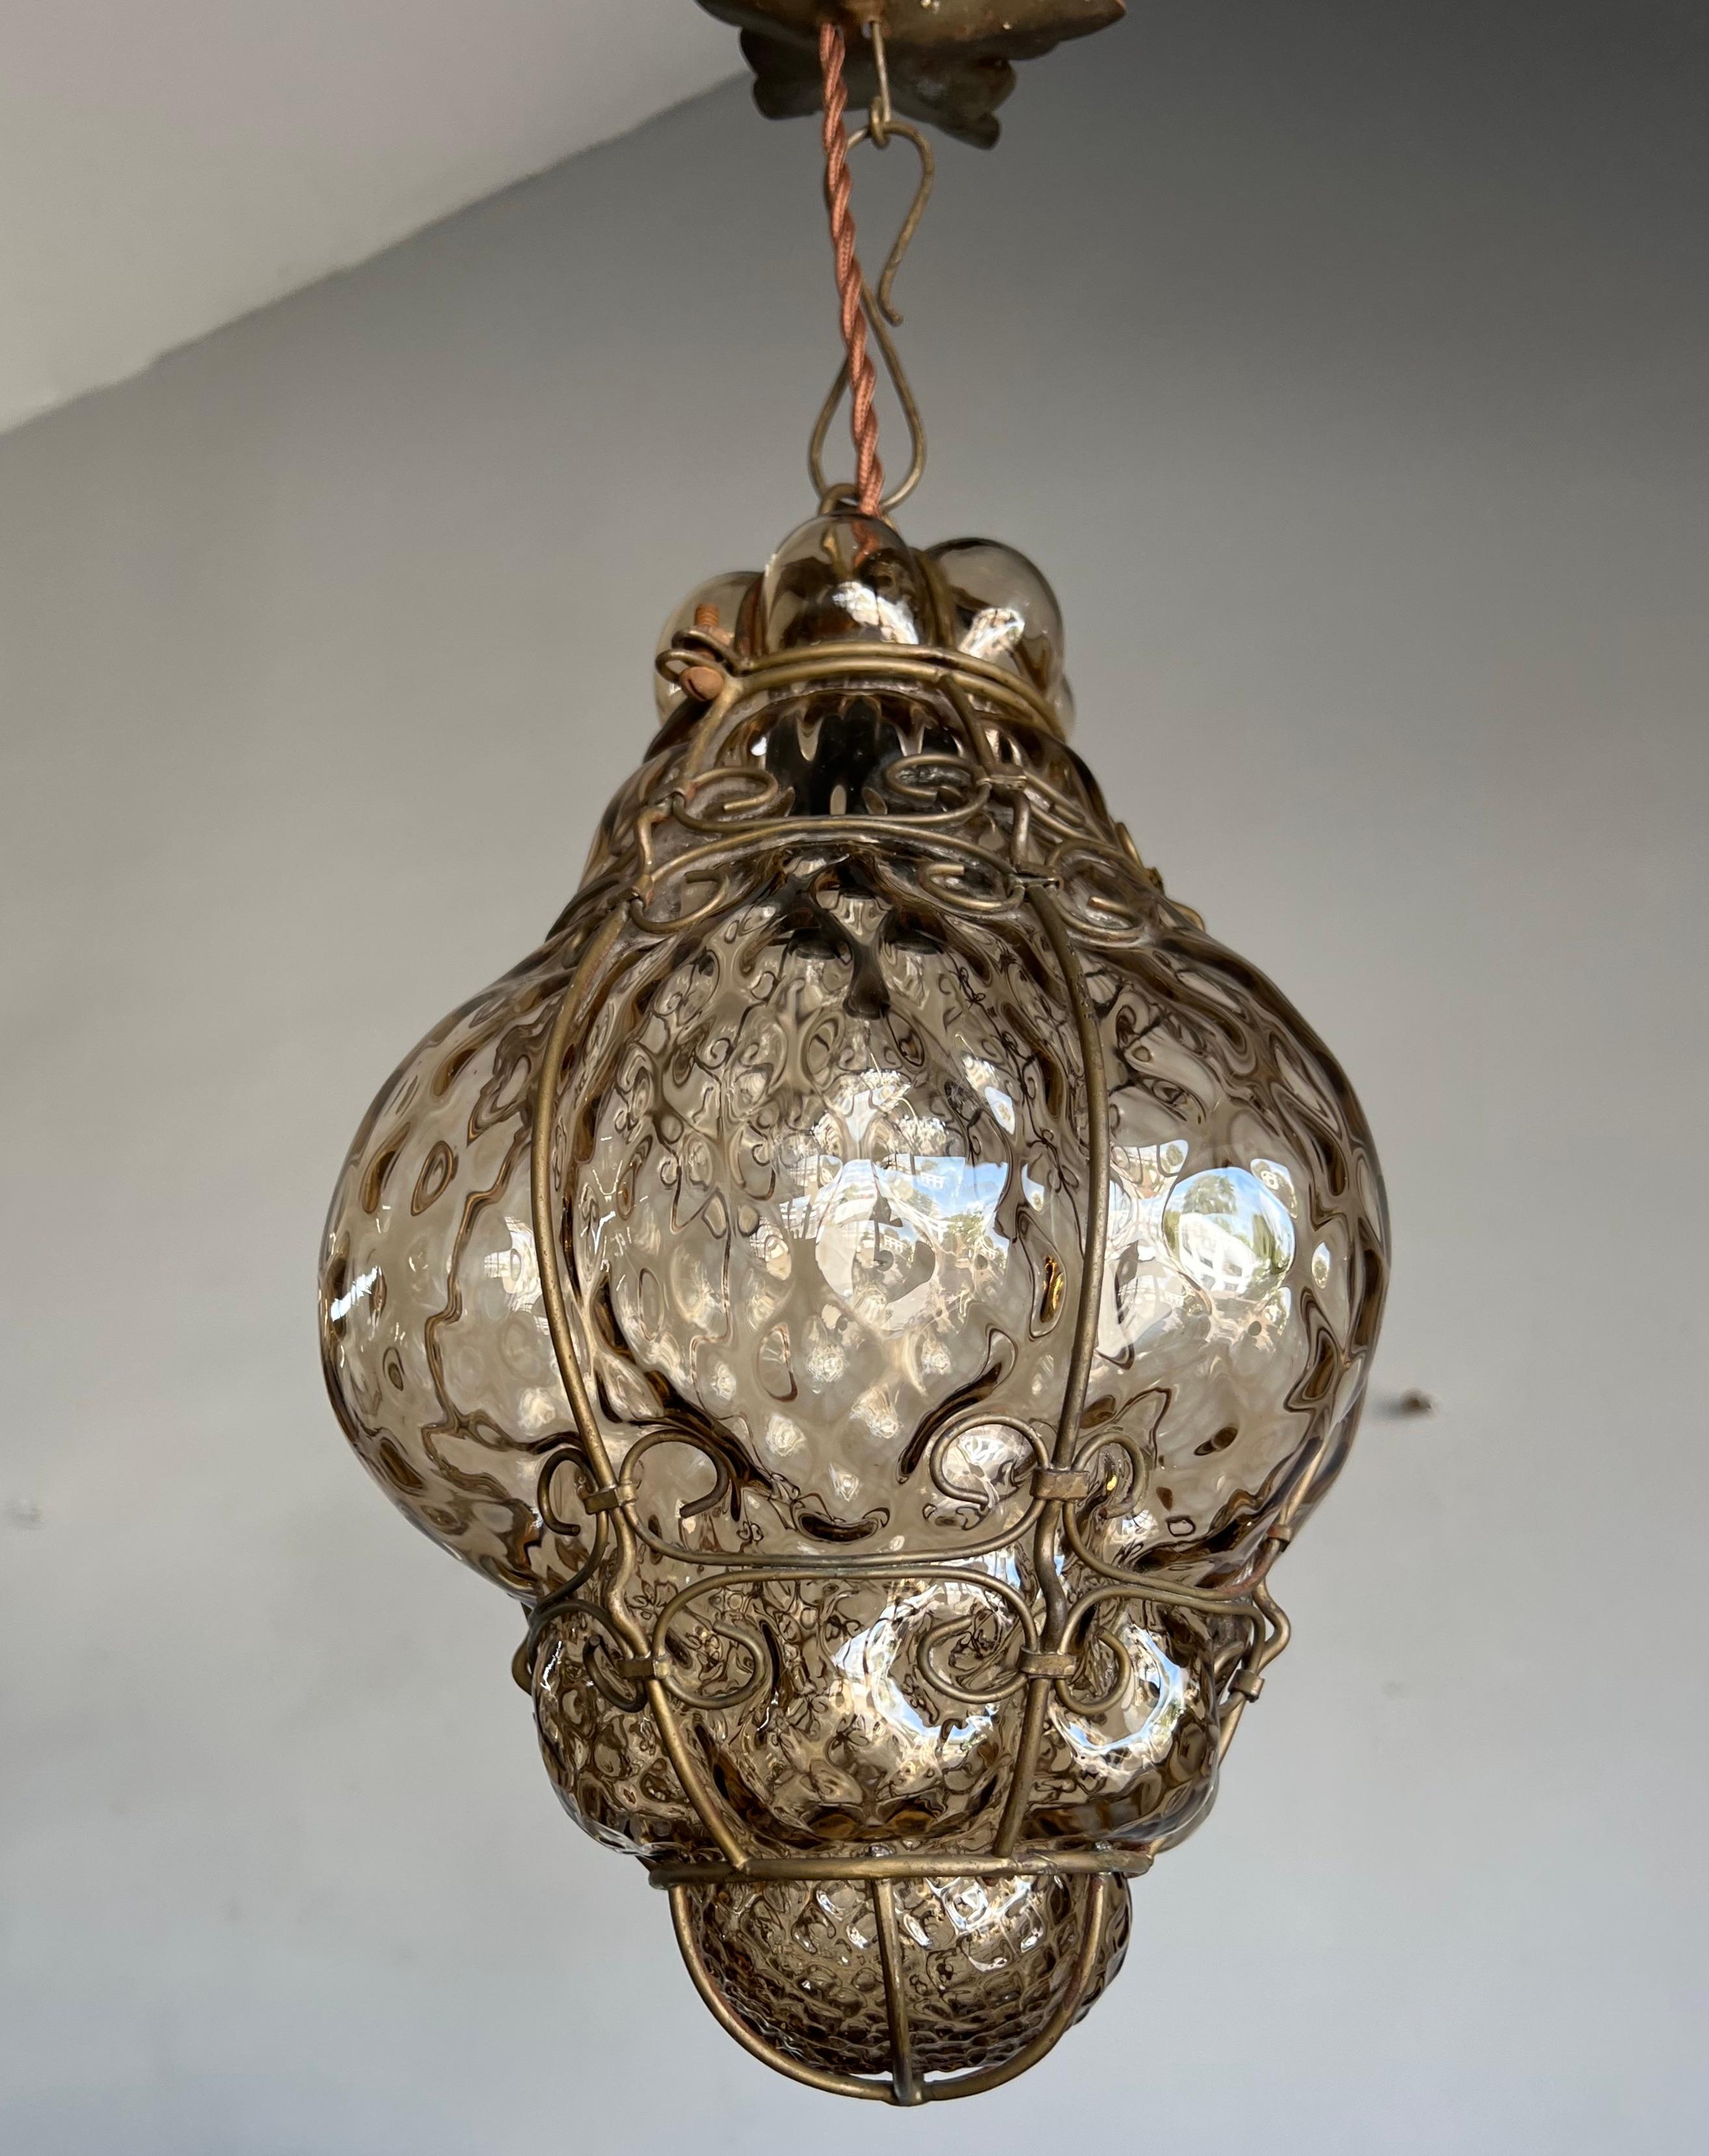 Small Antique Venetian Mouth Blown Smoked Glass Art in Iron Frame Pendant Light For Sale 10